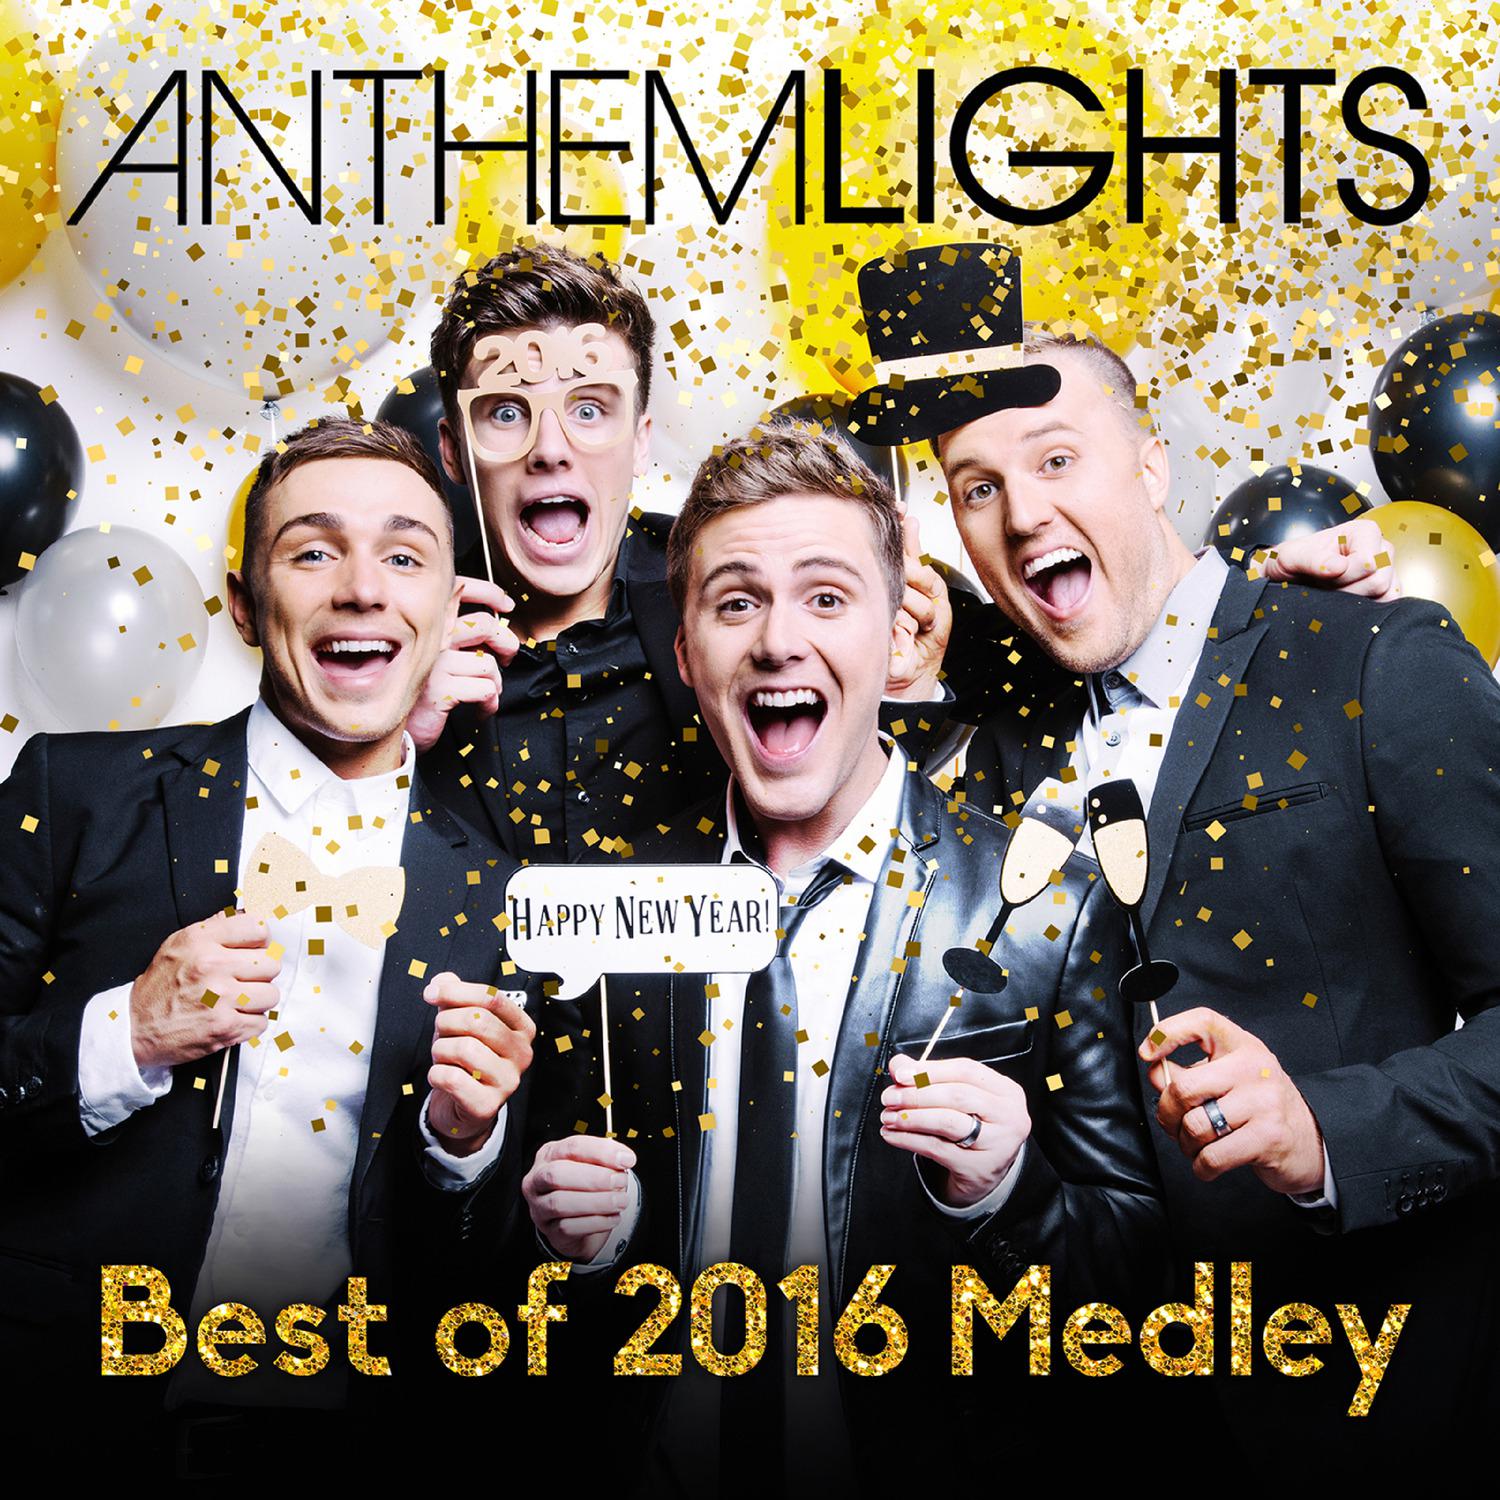 Best of 2016 Medley: Stressed Out / 7 Years / Work / Treat You Better / Can't Stop the Feeling / Closer / 24k歌词 歌手Anthem Lights-专辑Best of 2016 Medley: Stressed Out / 7 Years / Work / Treat You Better / Can't Stop the Feeling / Closer / 24k-单曲《Best of 2016 Medley: Stressed Out / 7 Years / Work / Treat You Better / Can't Stop the Feeling / Closer / 24k》LRC歌词下载